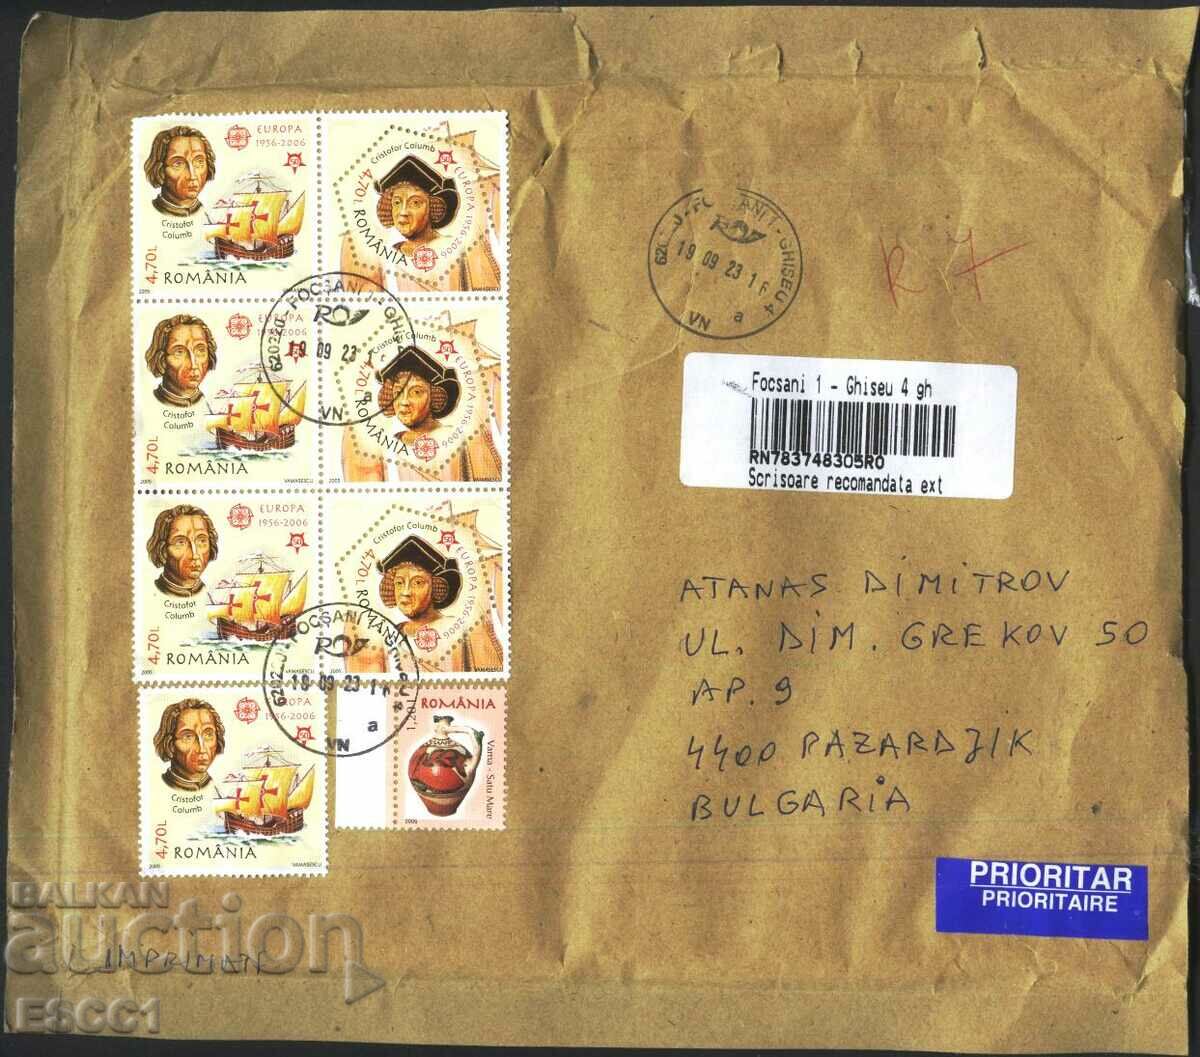 Traveled envelope with stamps Europe SEP 2005 Pitcher 2005 from Romania